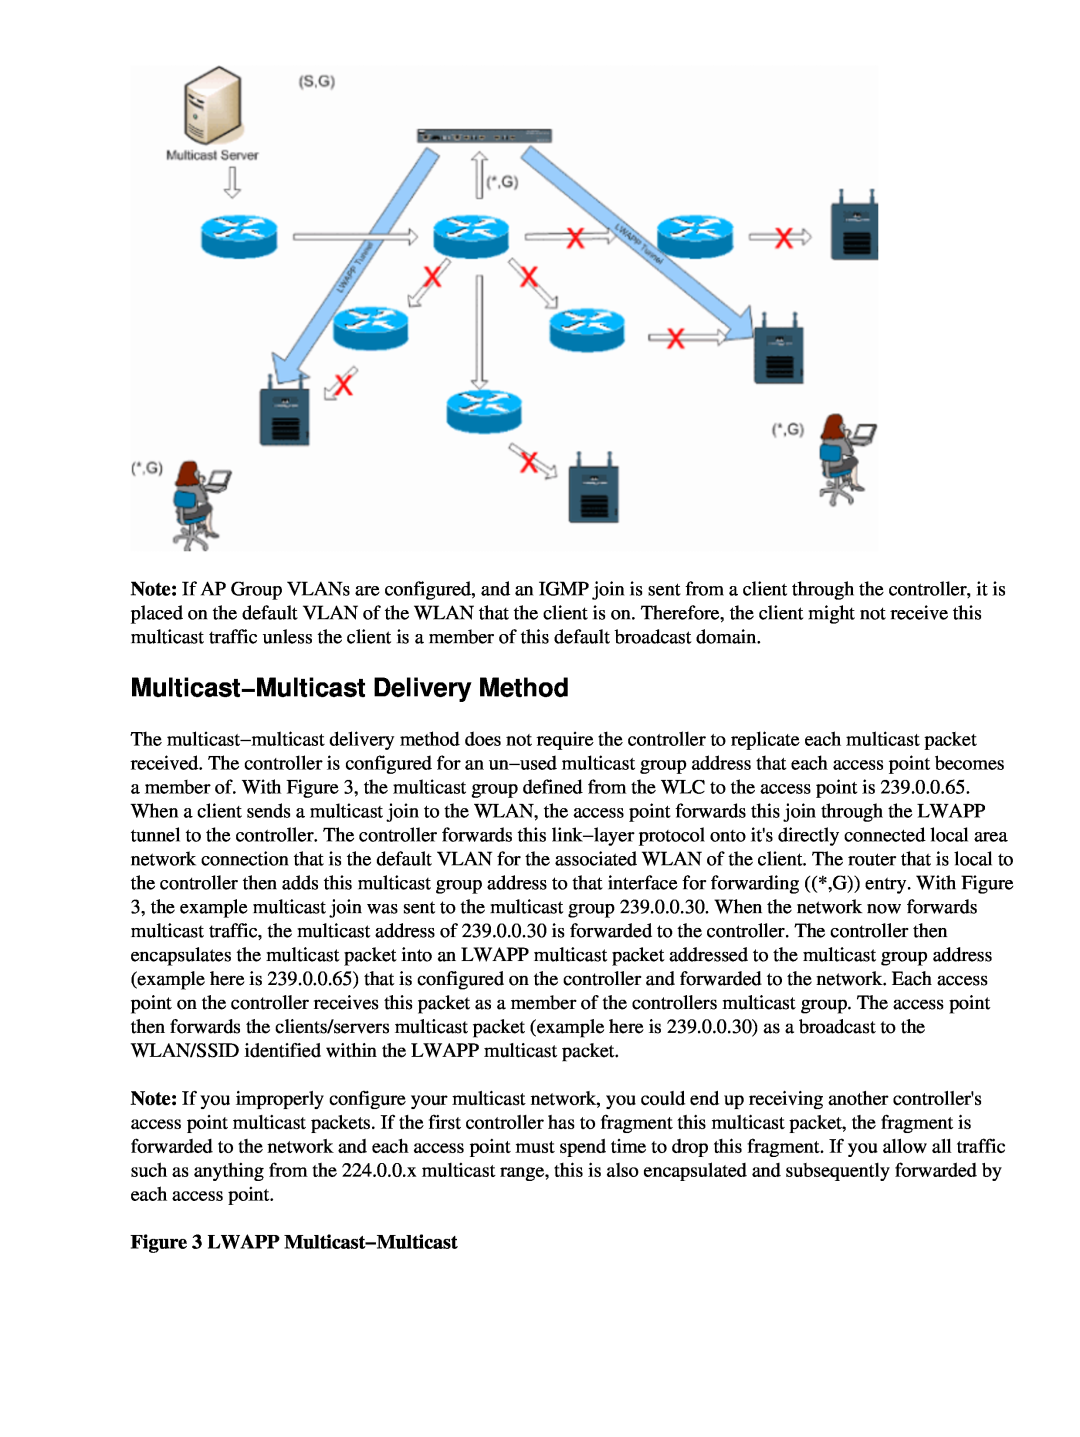 Cisco Systems 71642 manual Multicast−Multicast Delivery Method, LWAPP Multicast−Multicast 